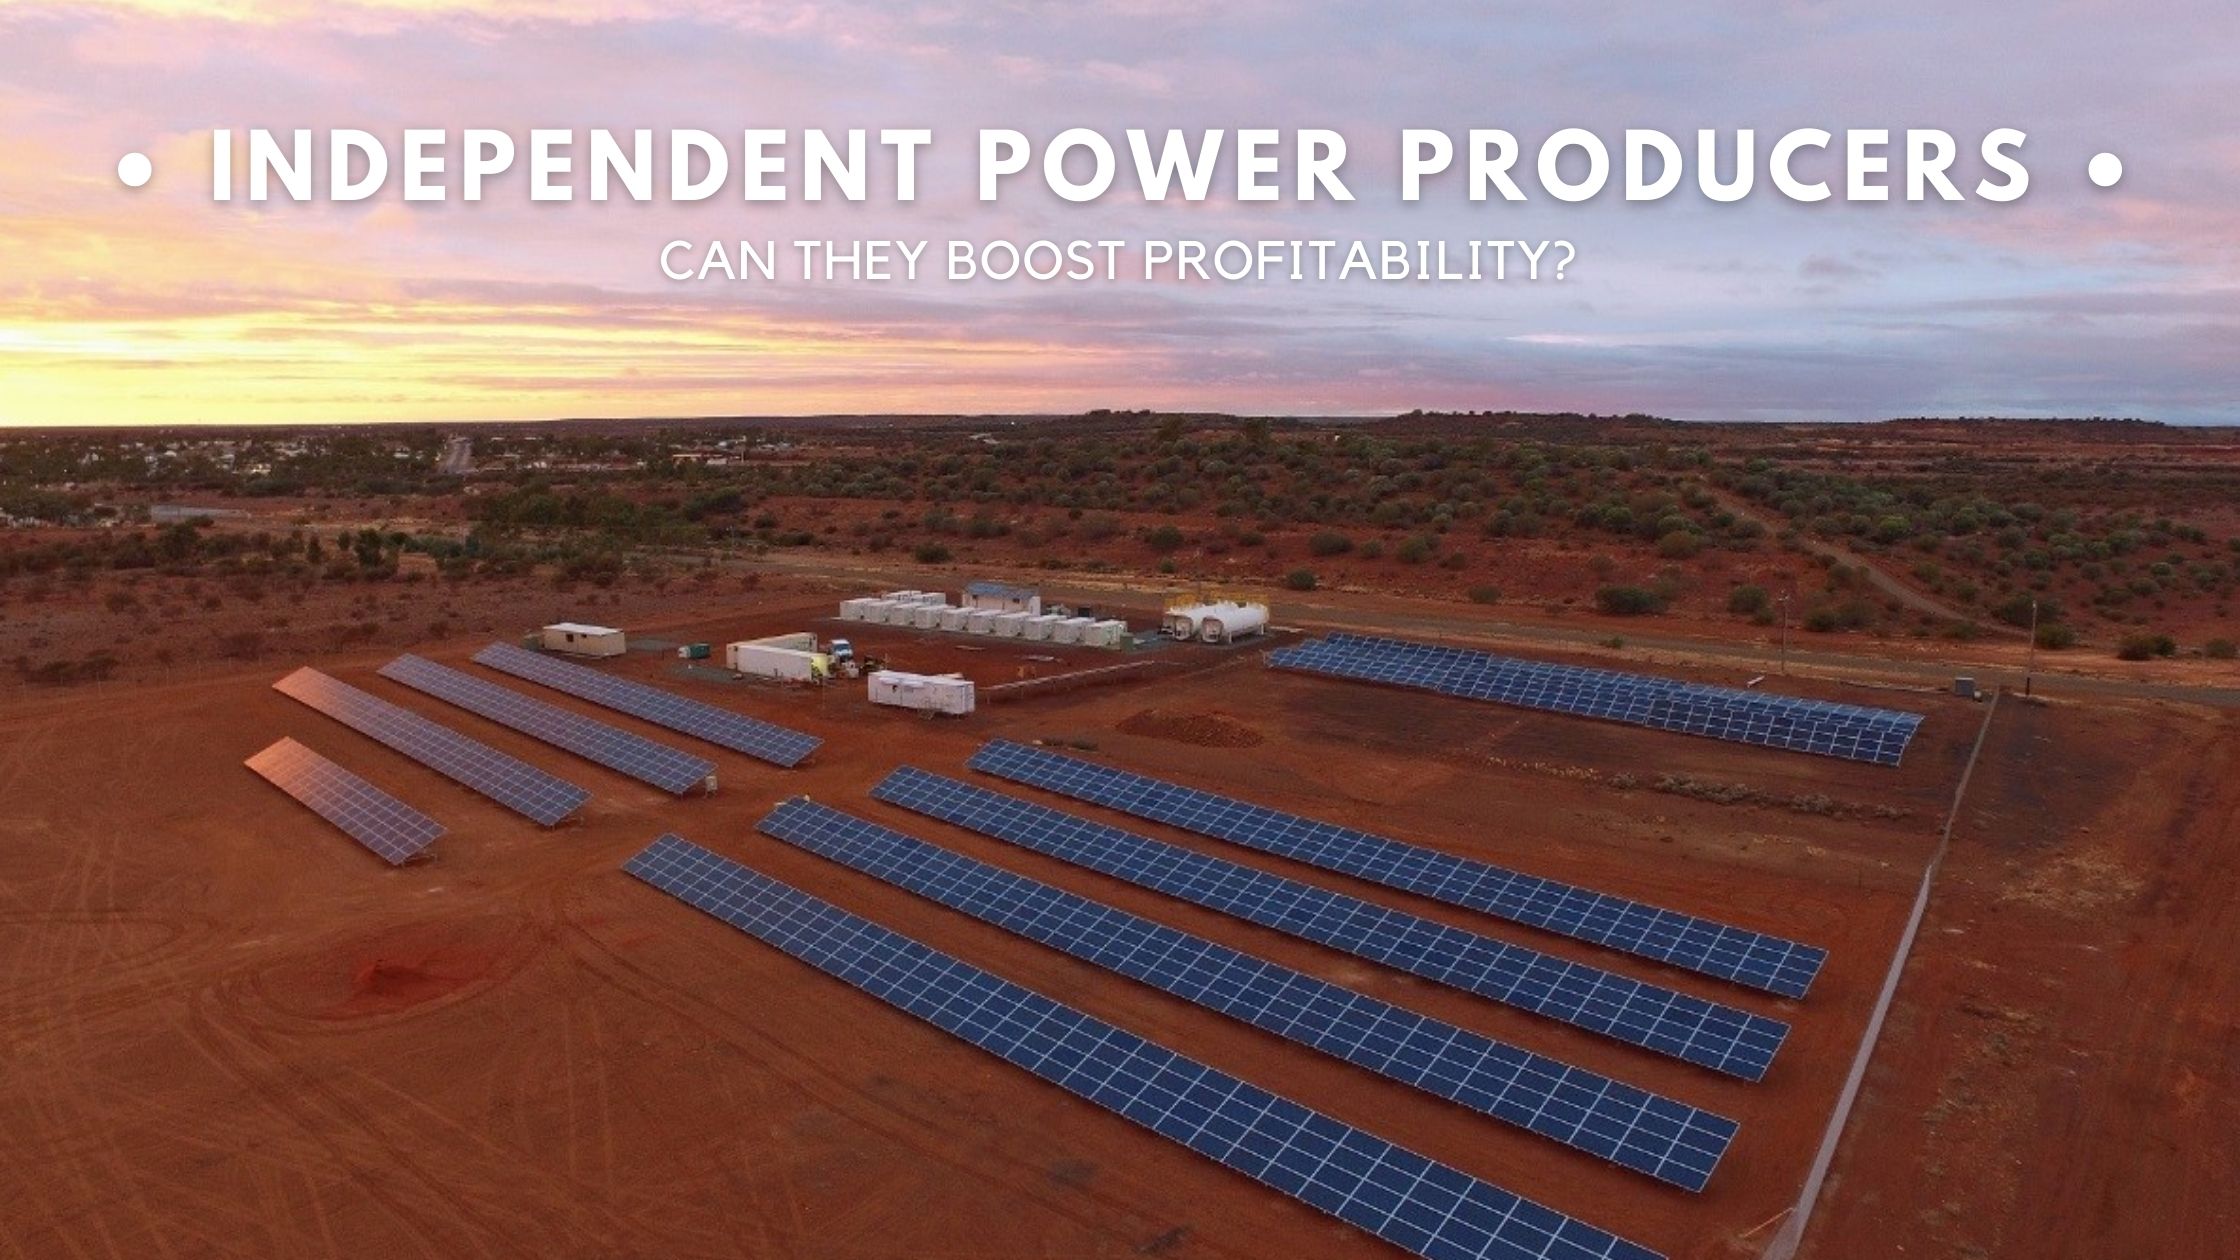 Independent Power Producers – Can They Boost Profitability